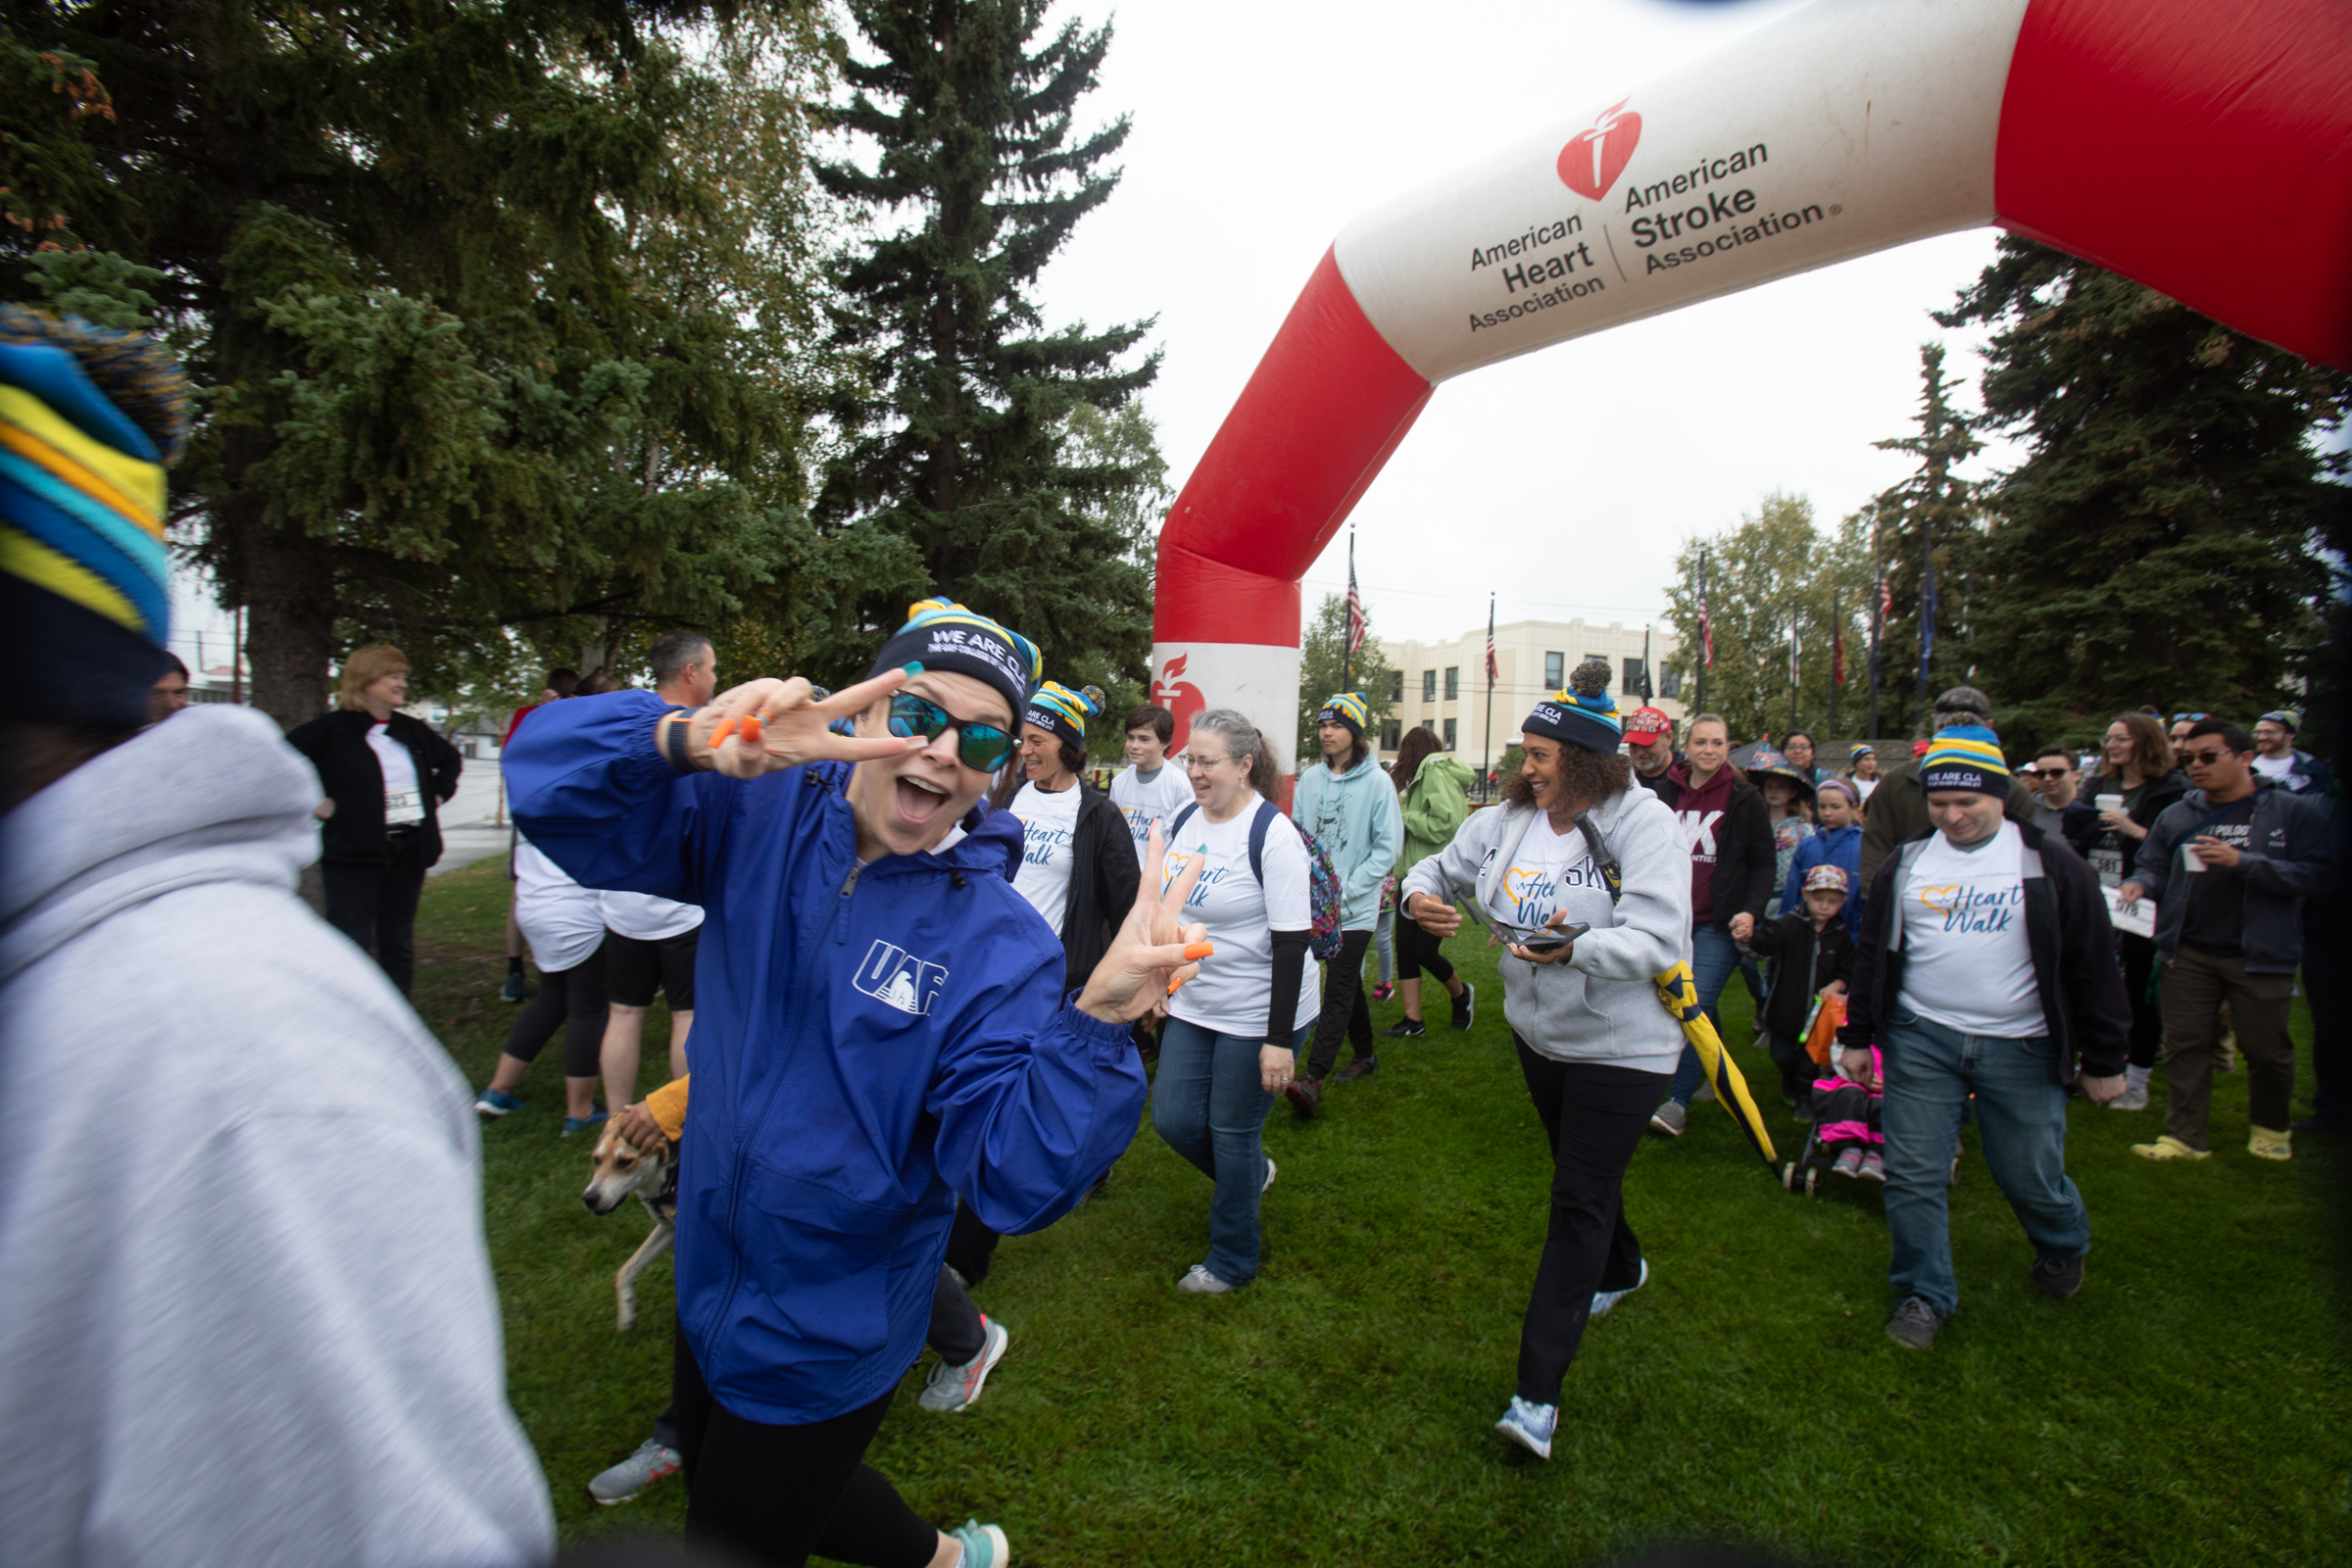 UAF teams join in for a good cause by participating in the annual American Heart Association Heart Walk through downtown Fairbanks, Aug. 27, 2022.